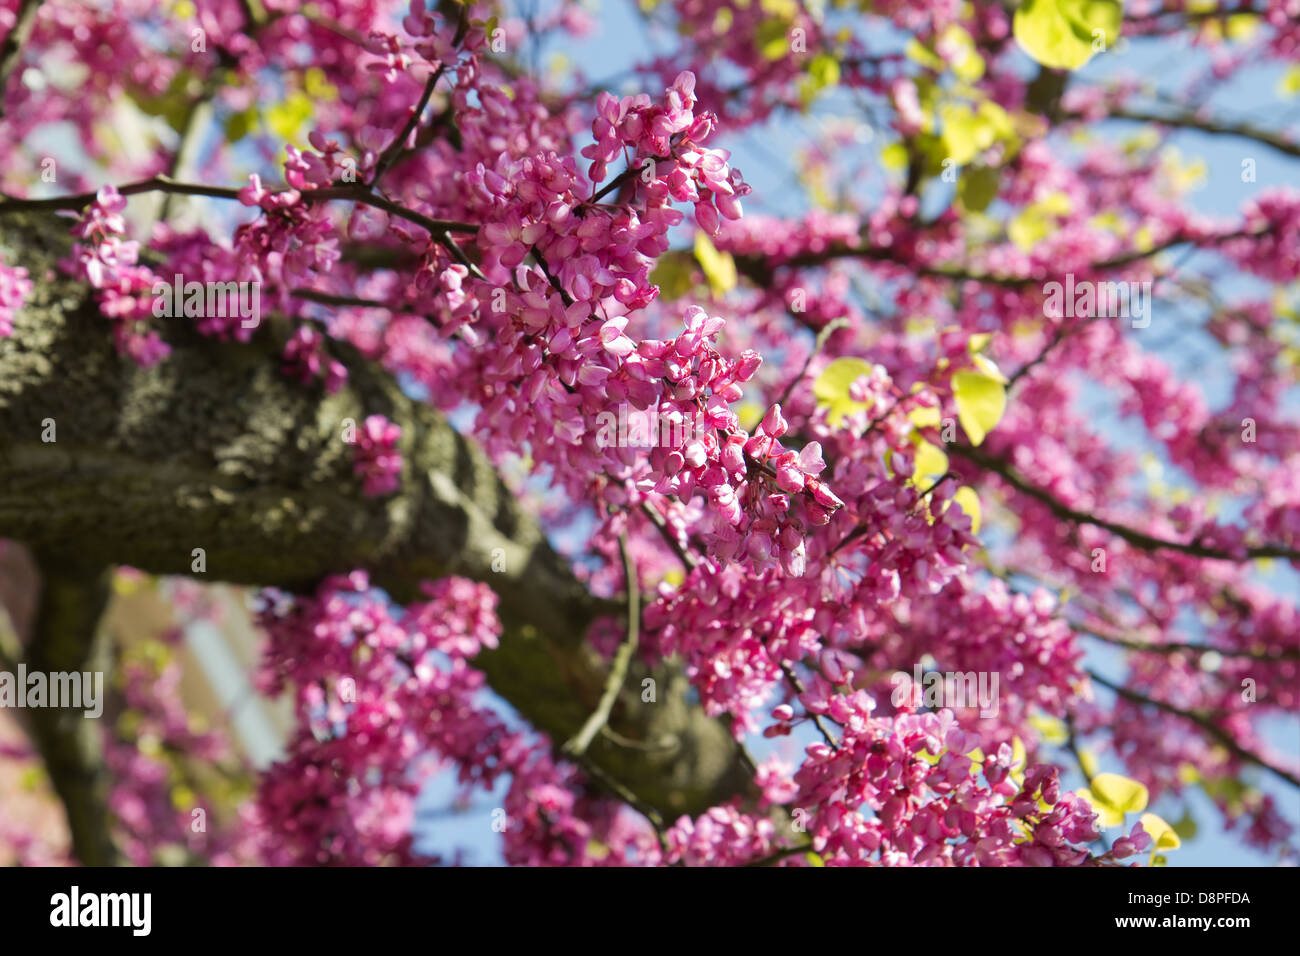 Pink Blooming branches of Judas tree or Cercis siliquastrum with blue sky Stock Photo